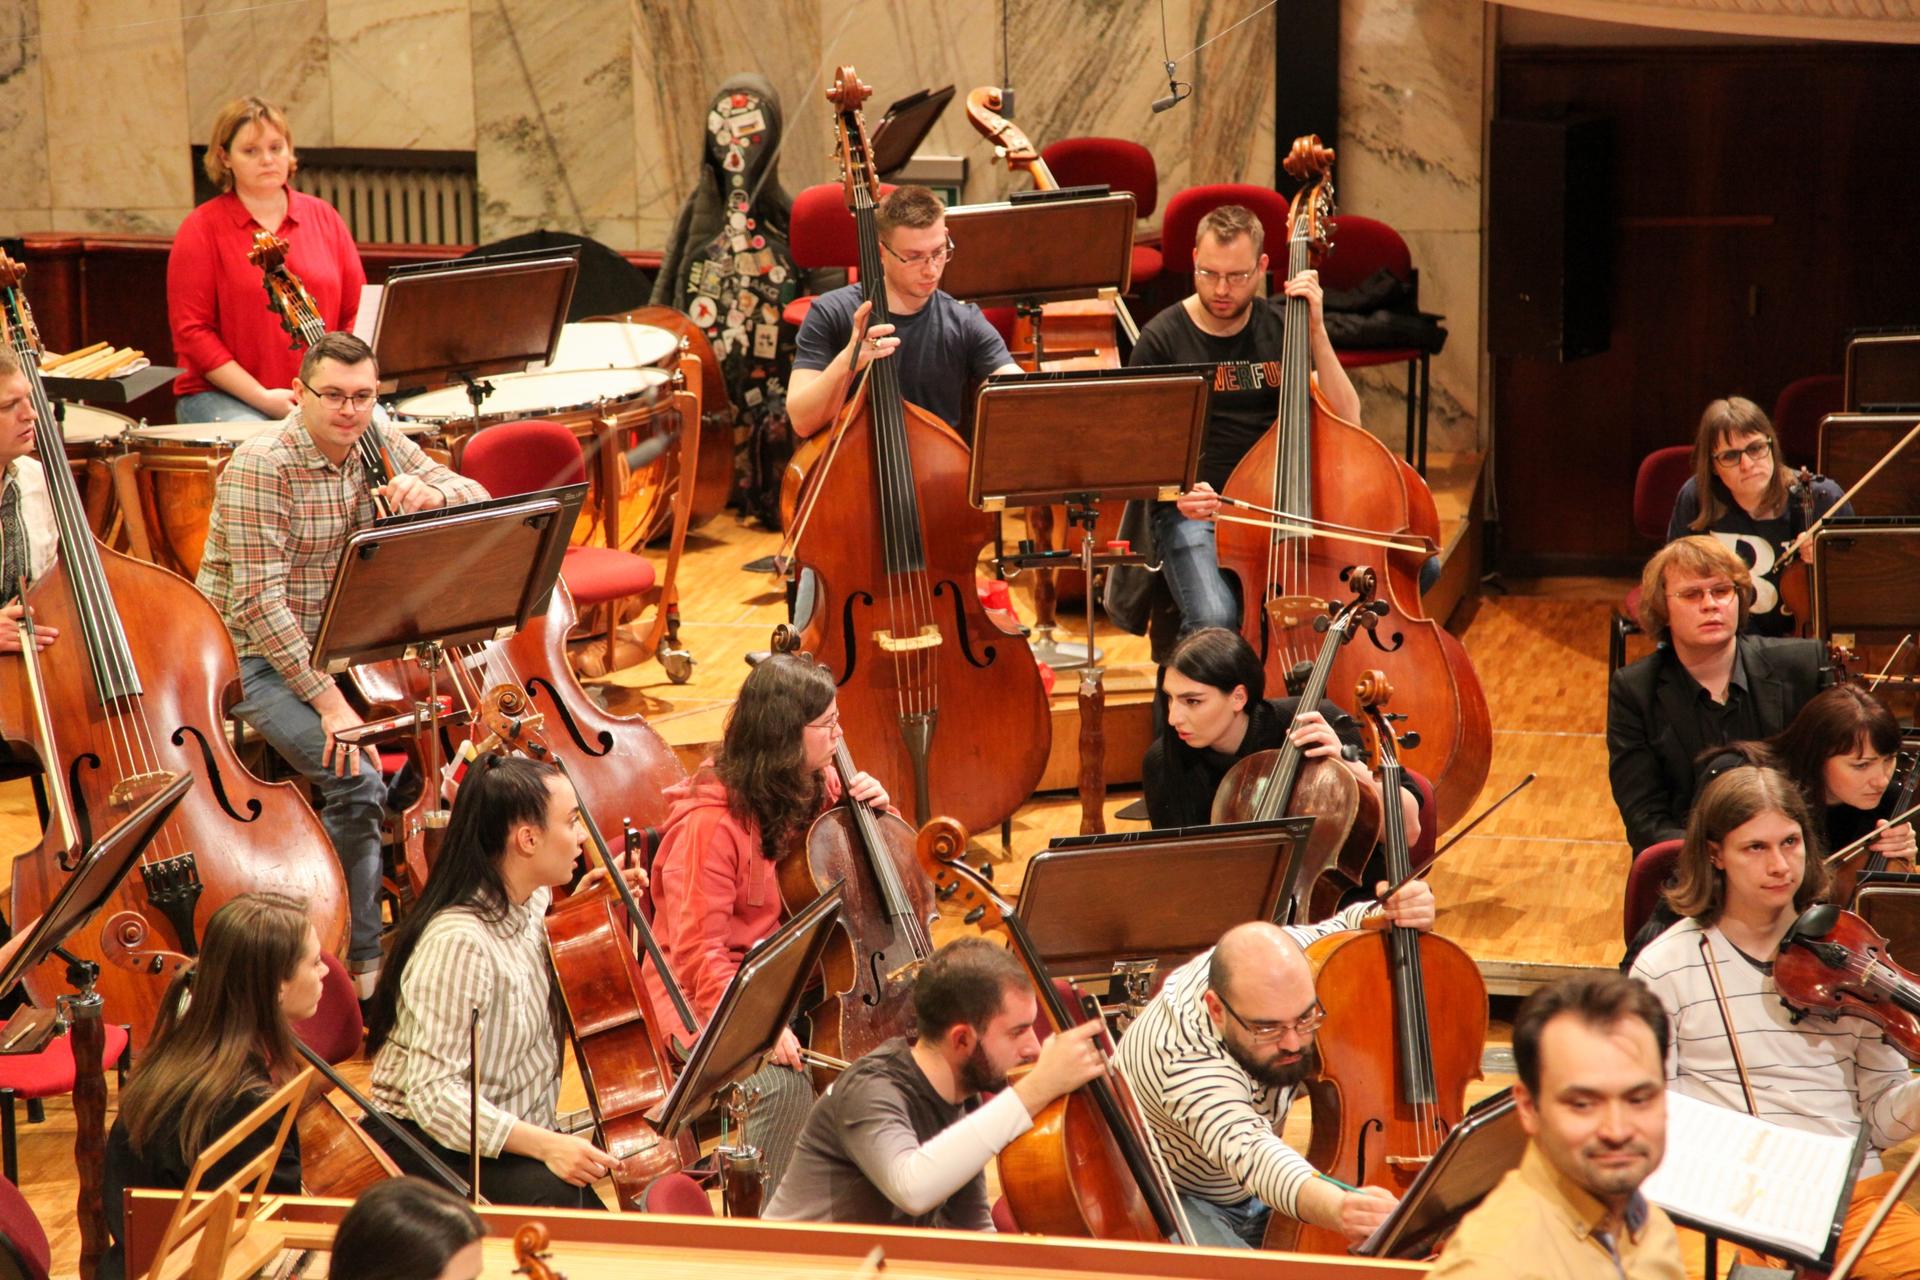 The Kyiv Symphony Orchestra rehearses at the National Philharmonic in Warsaw, Poland, the day before the premiere performance of the "Voice of Ukraine" tour